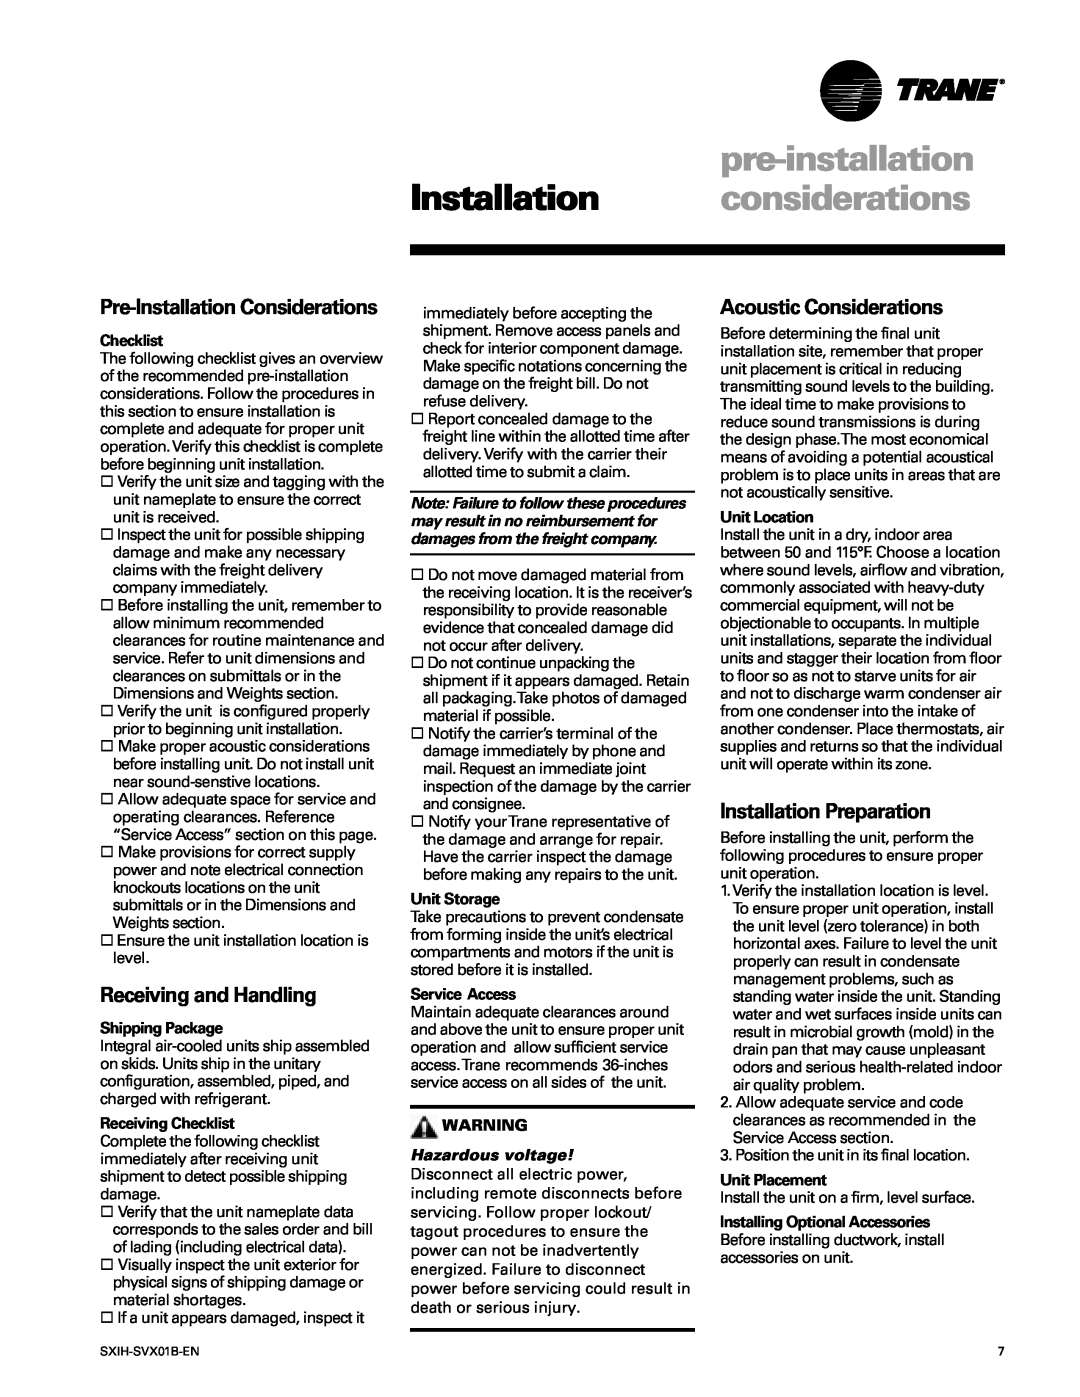 Trane SCIH manual pre-installation Installation considerations, Receiving and Handling, Acoustic Considerations 